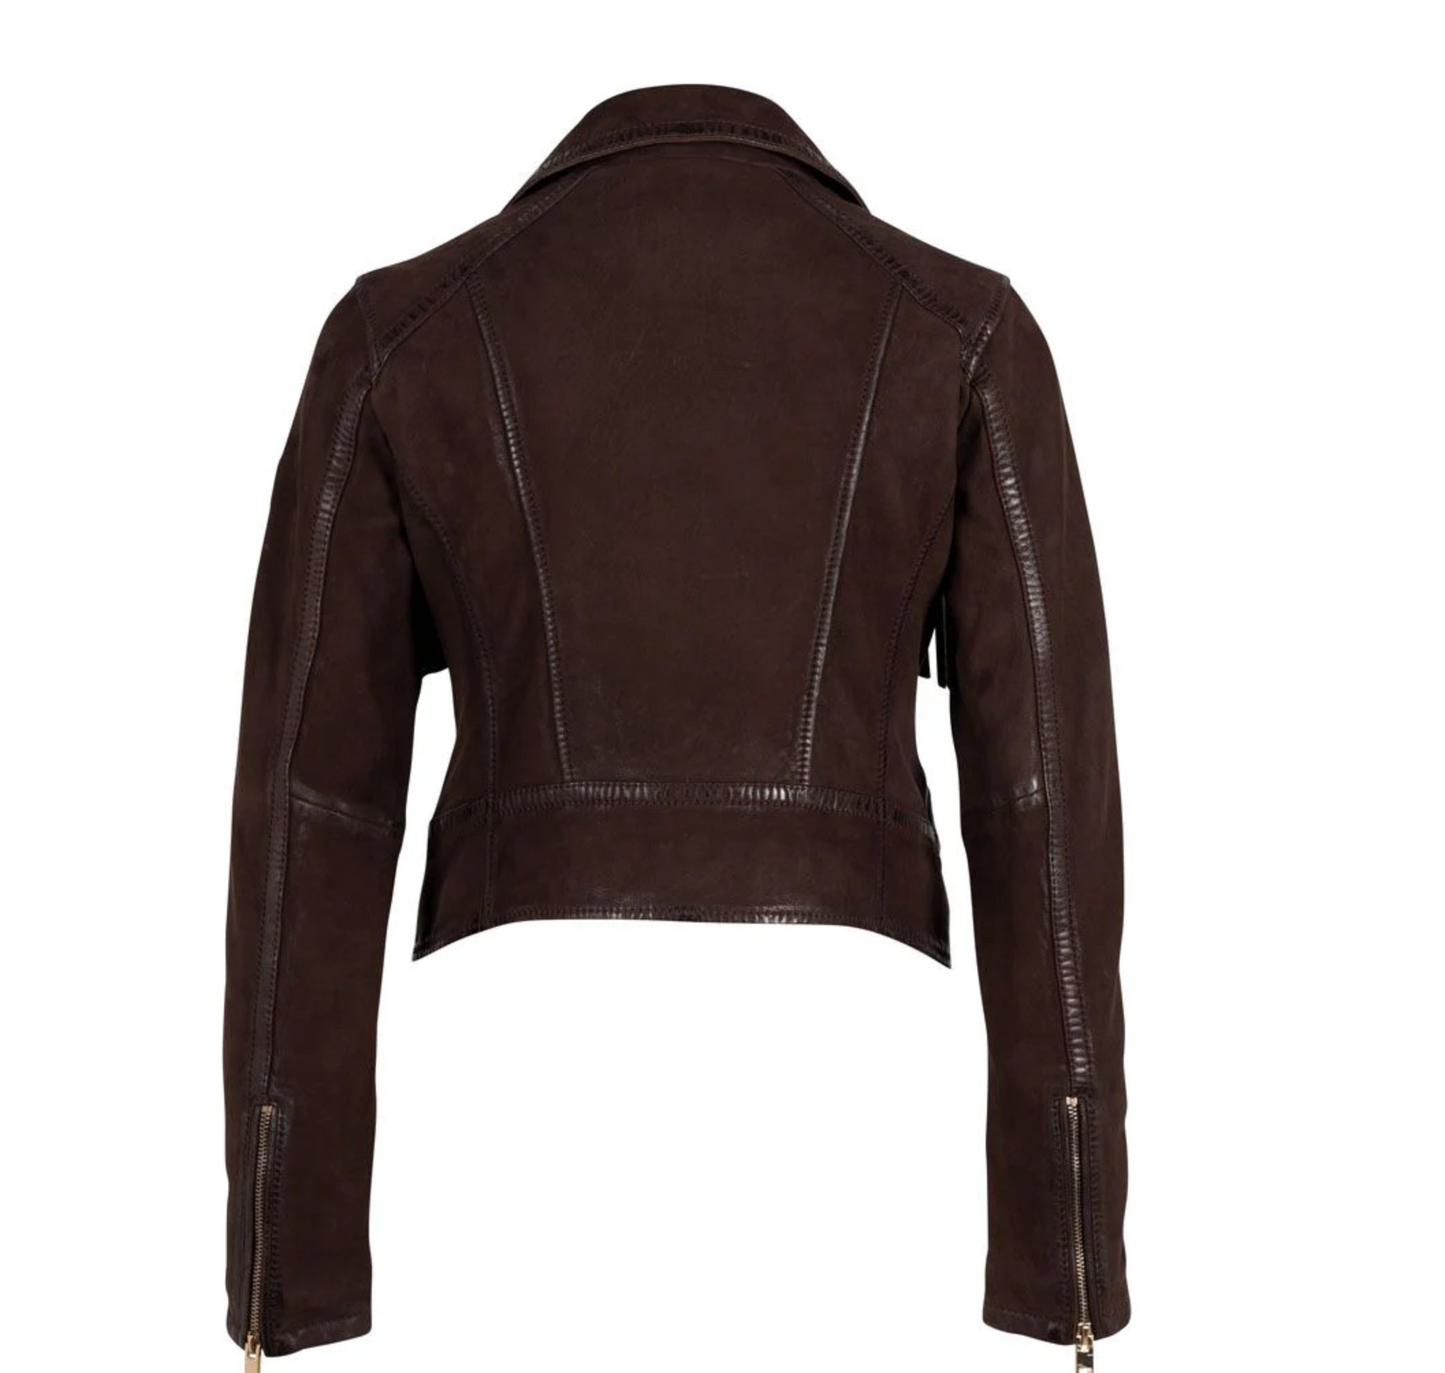 Fanny Leather Jacket in Dark Brown by Mauritius